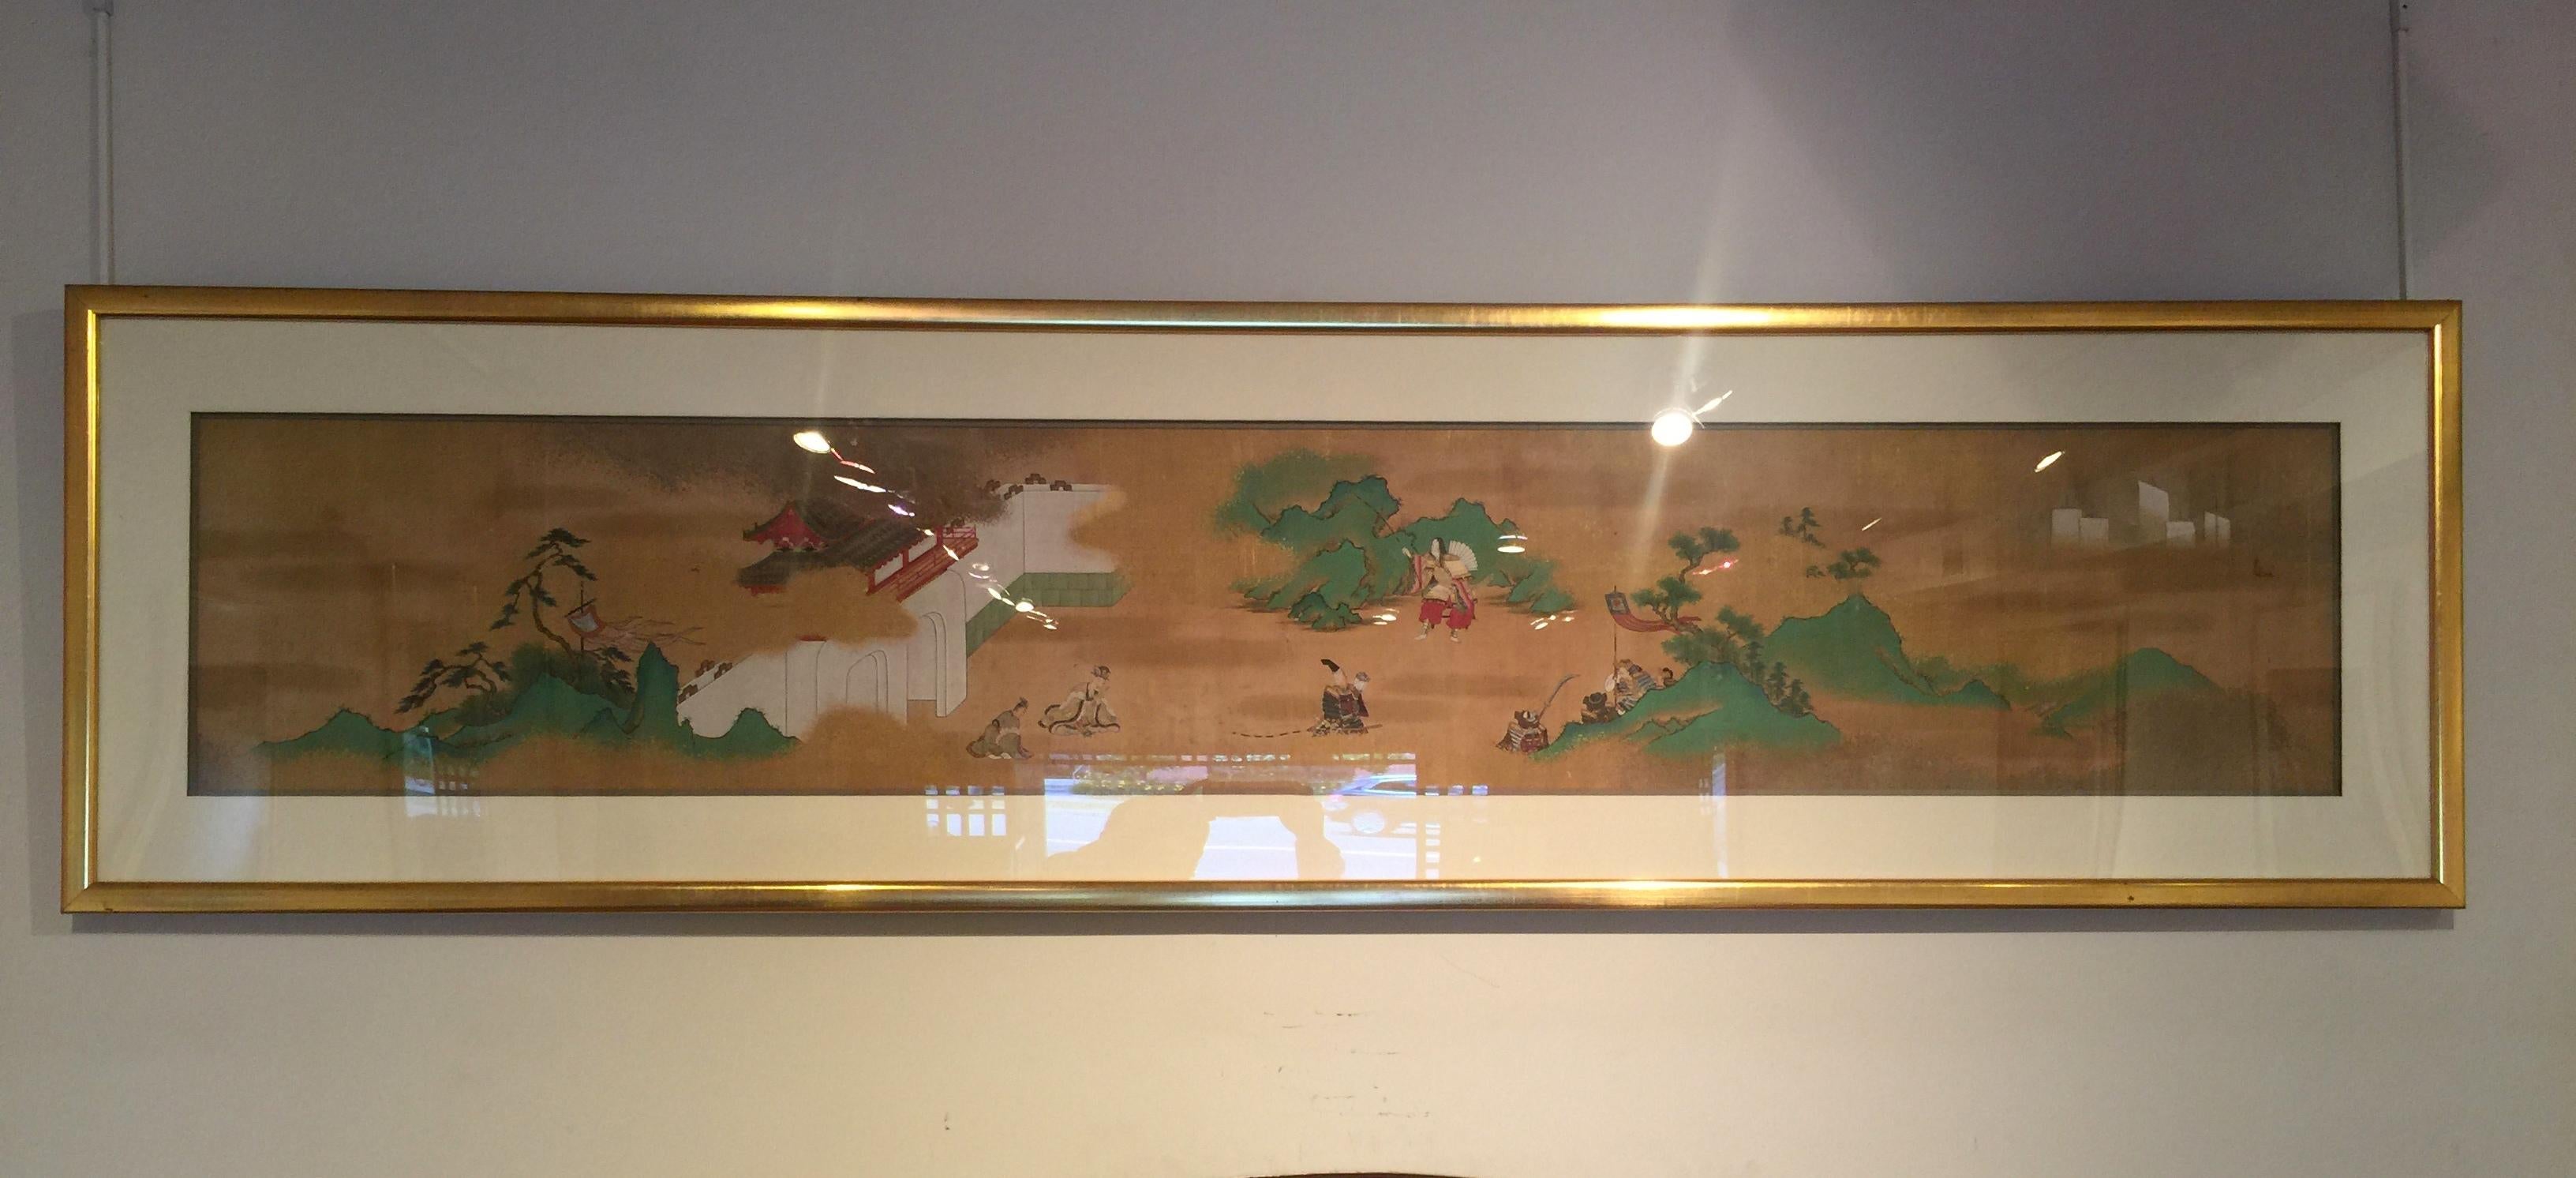 refined Japanese brush painting of samurais and archers in the landscape, a section originally from a handscroll.
 ink and color on silk.  Conservation Frame
Overall size:  74